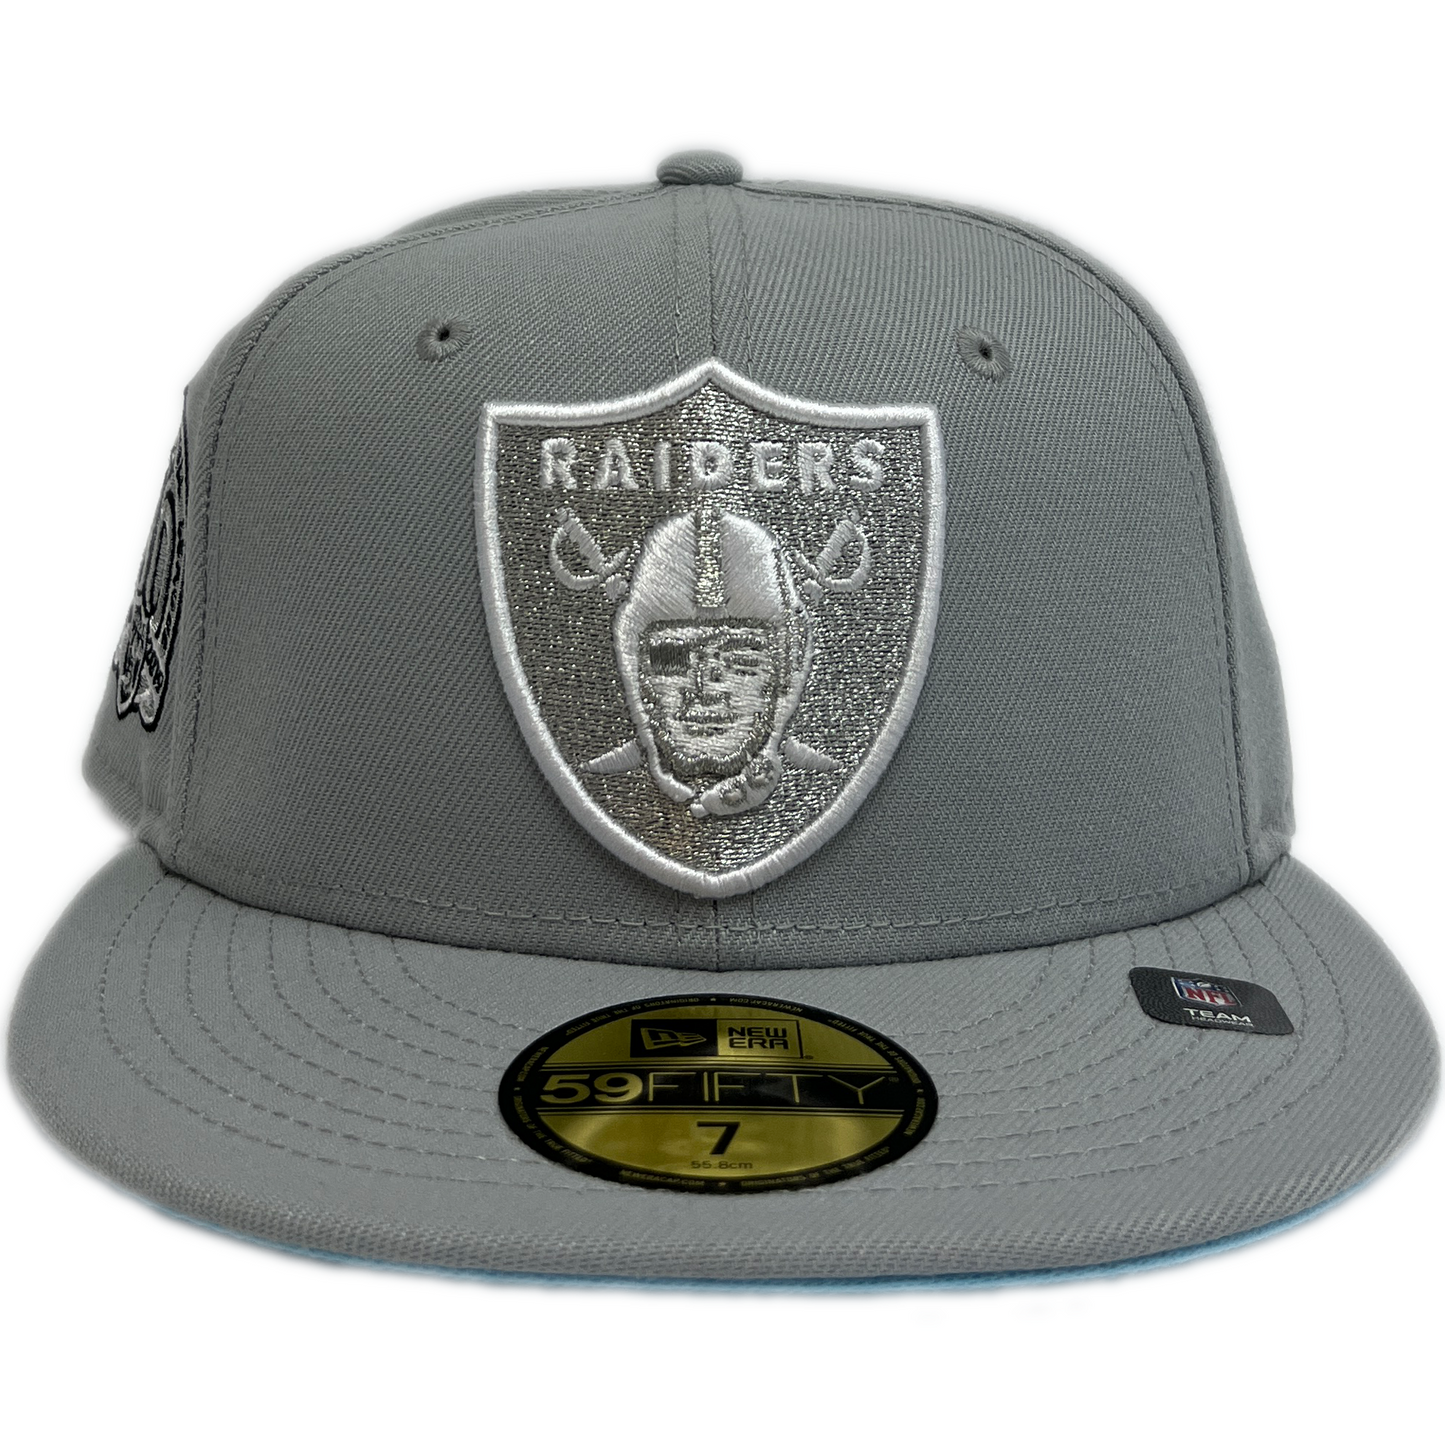 New Era Oakland Raiders 59Fifty Fitted Hat - Grey